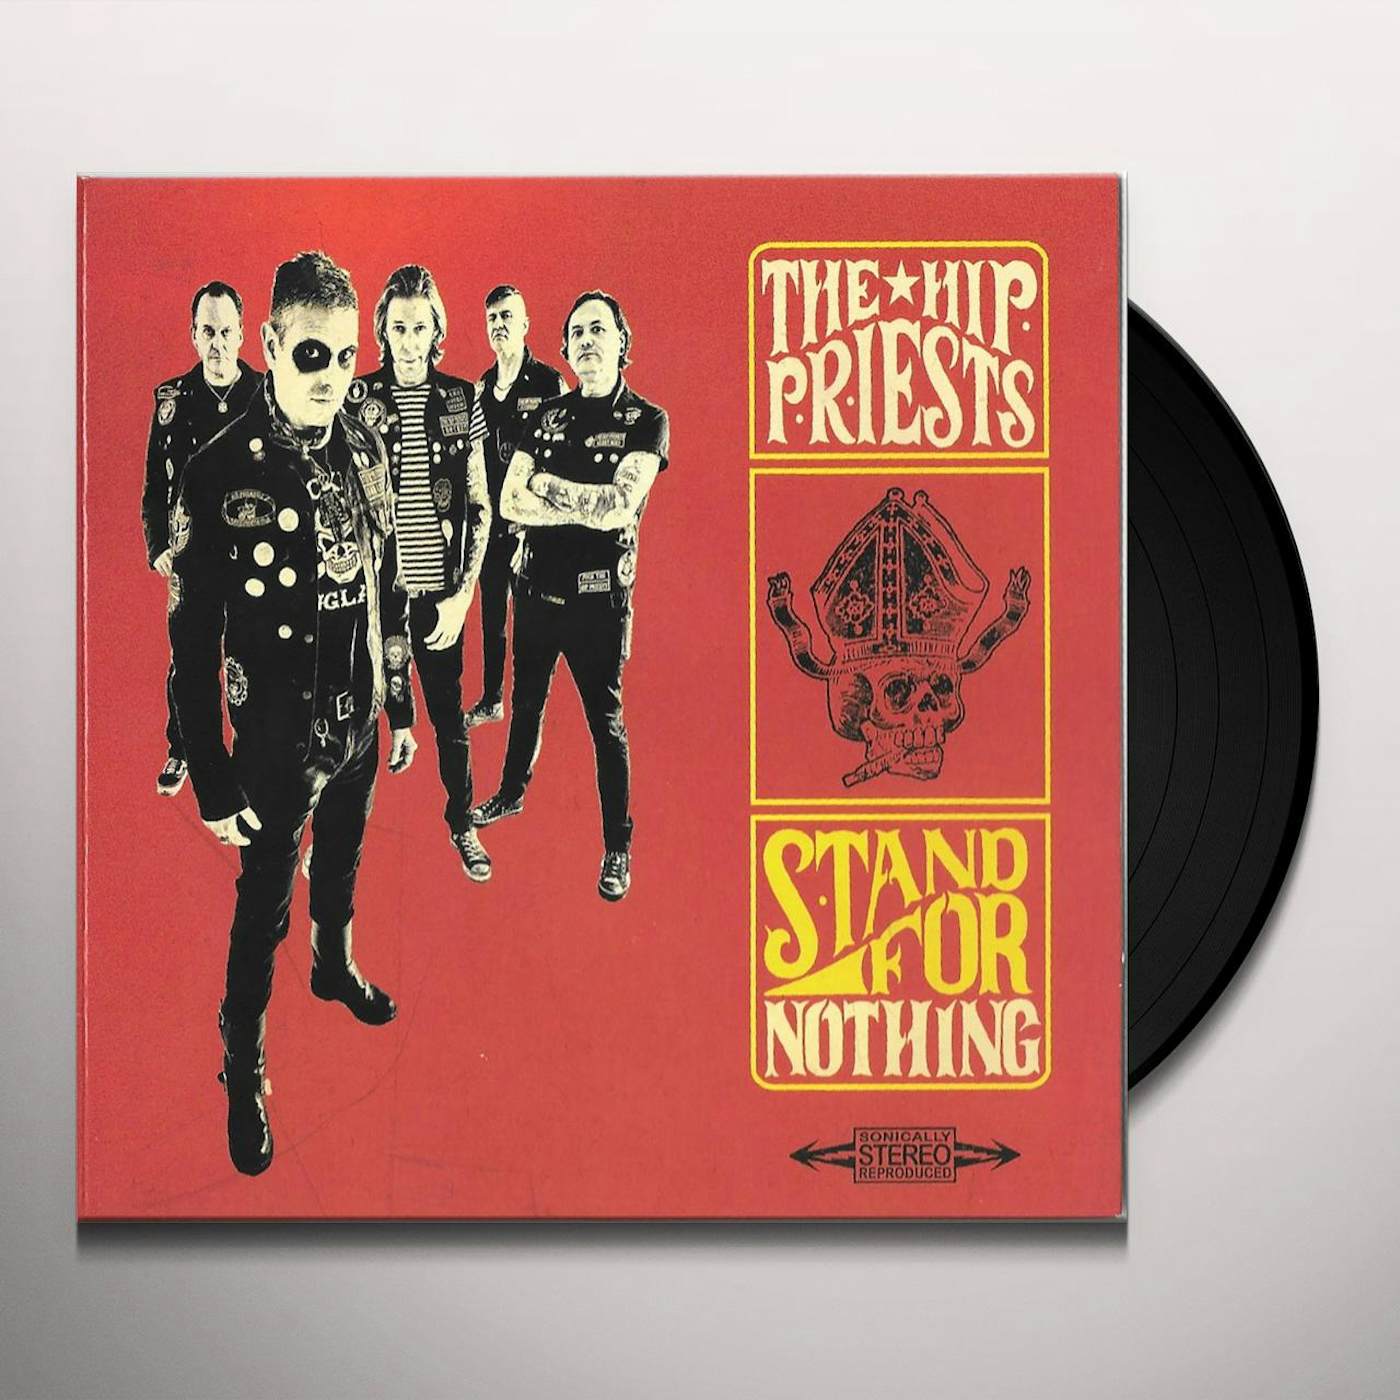 The Hip Priests Stand for Nothing Vinyl Record